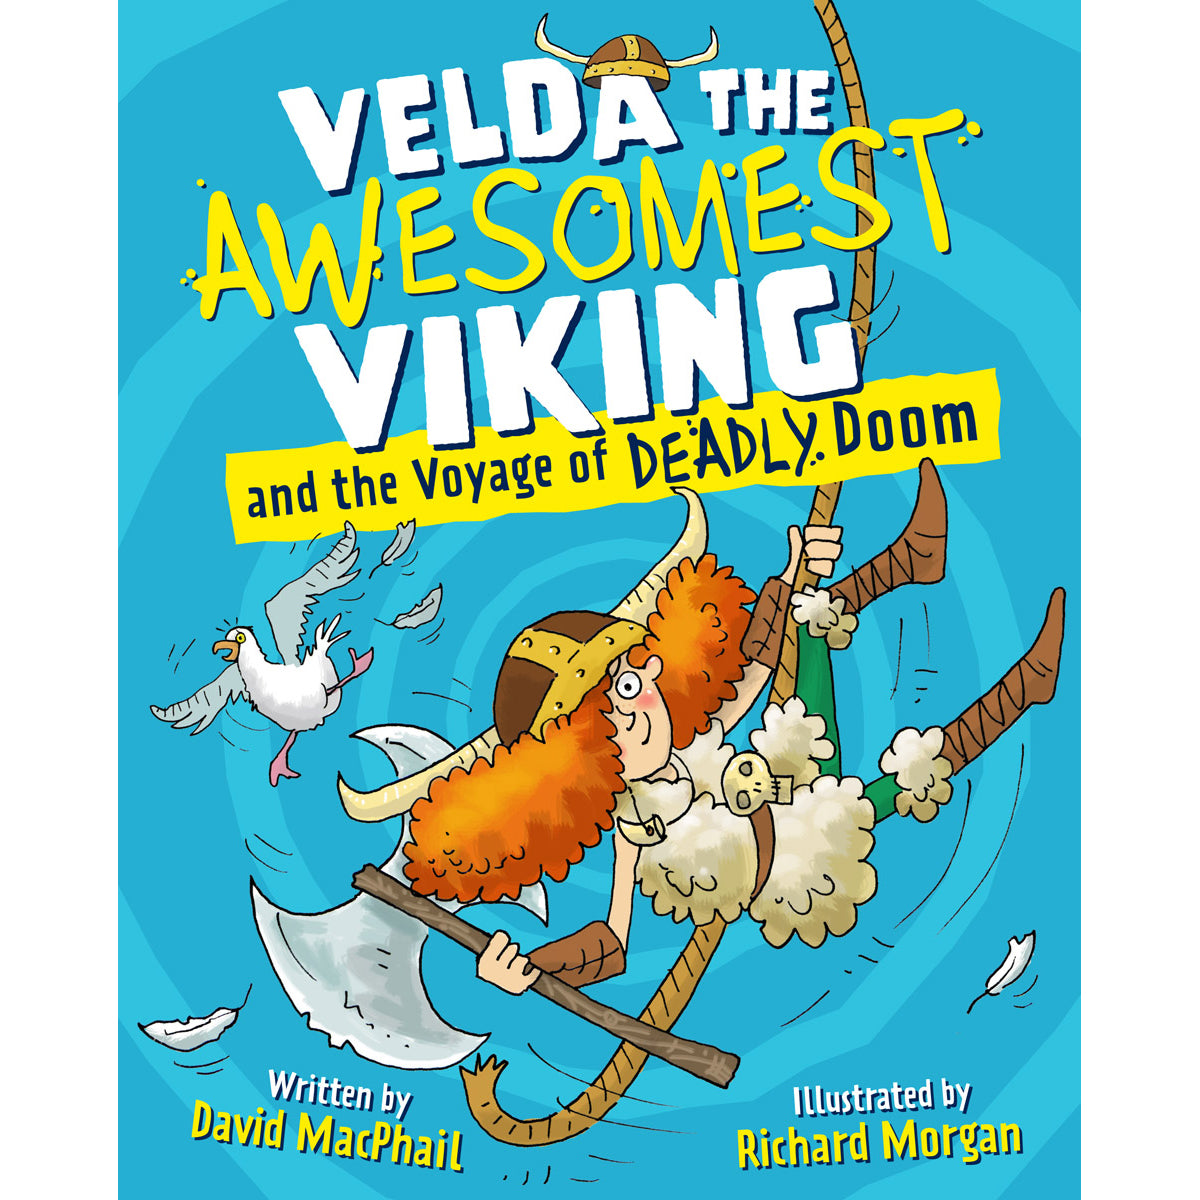 Velda the Awesomest Viking and the Voyage of the Deadly Doom